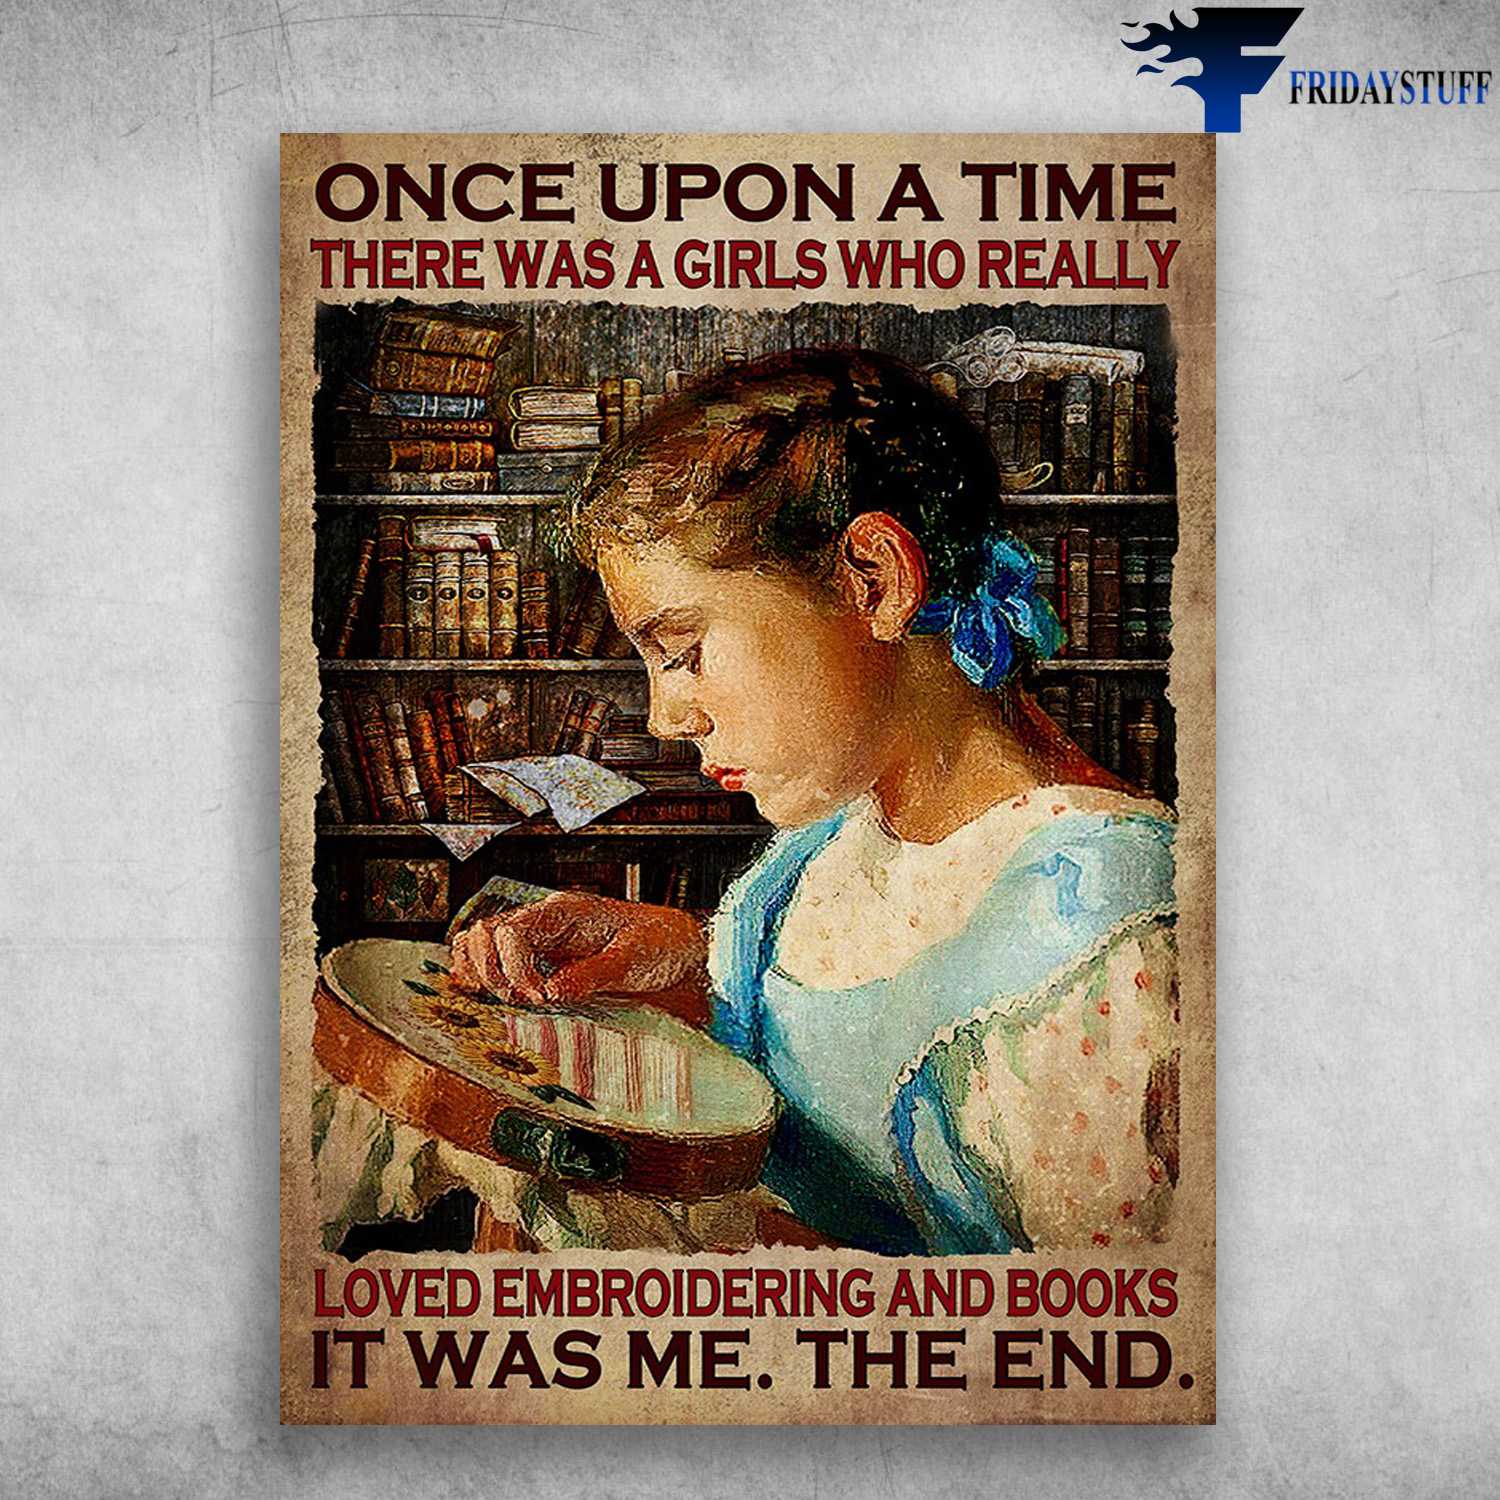 Embroidering Girl, Book Lover - Once Upon A Time, There Was A Girls Who Really Loved, Embroidering And Books, It Was Me, The End